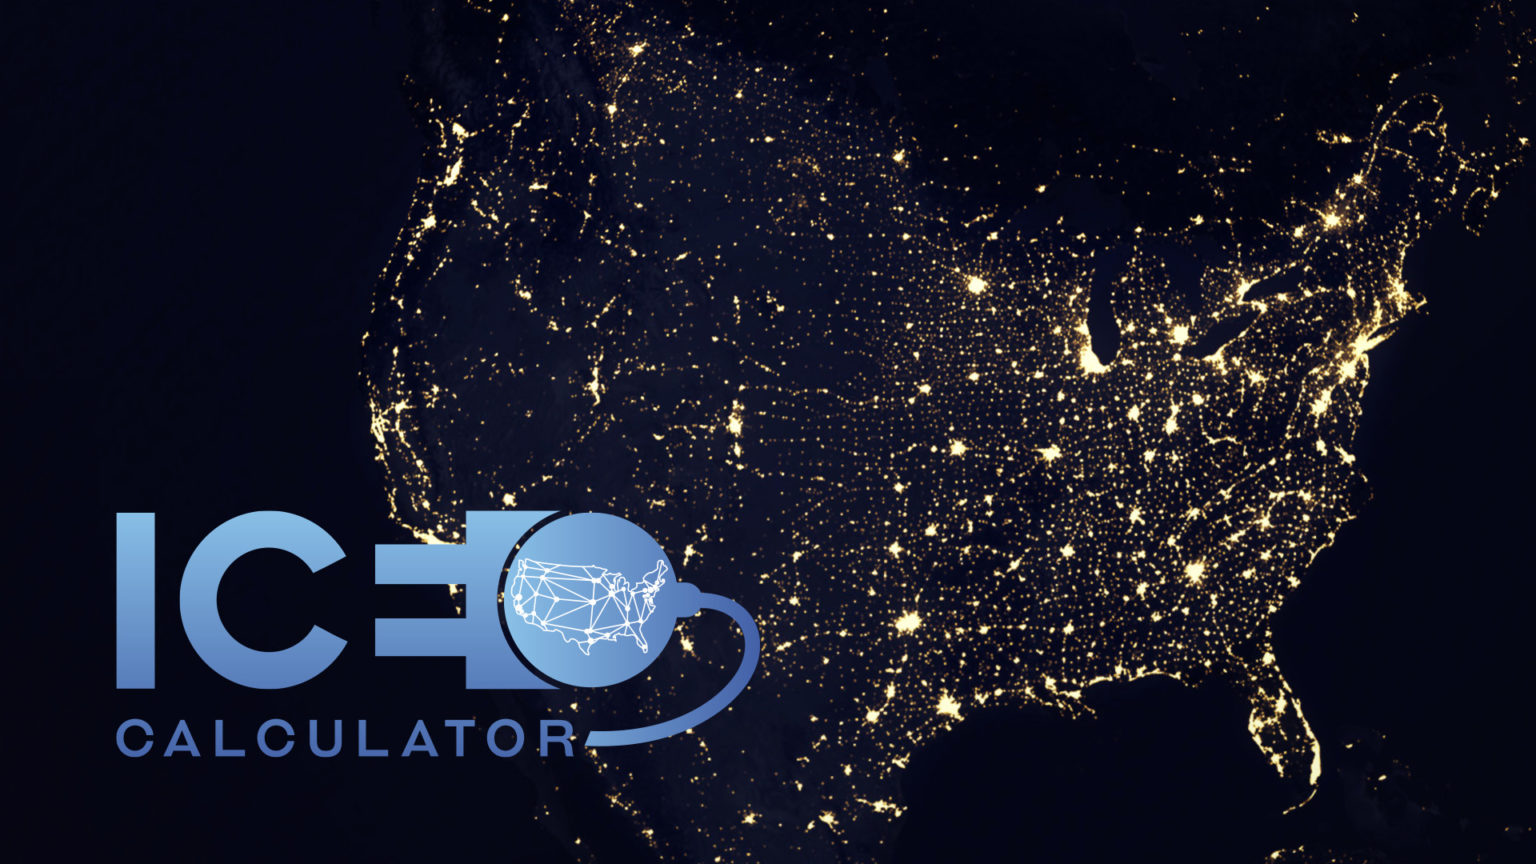 Light map of the United States with a graphic overlay of the ICE logo